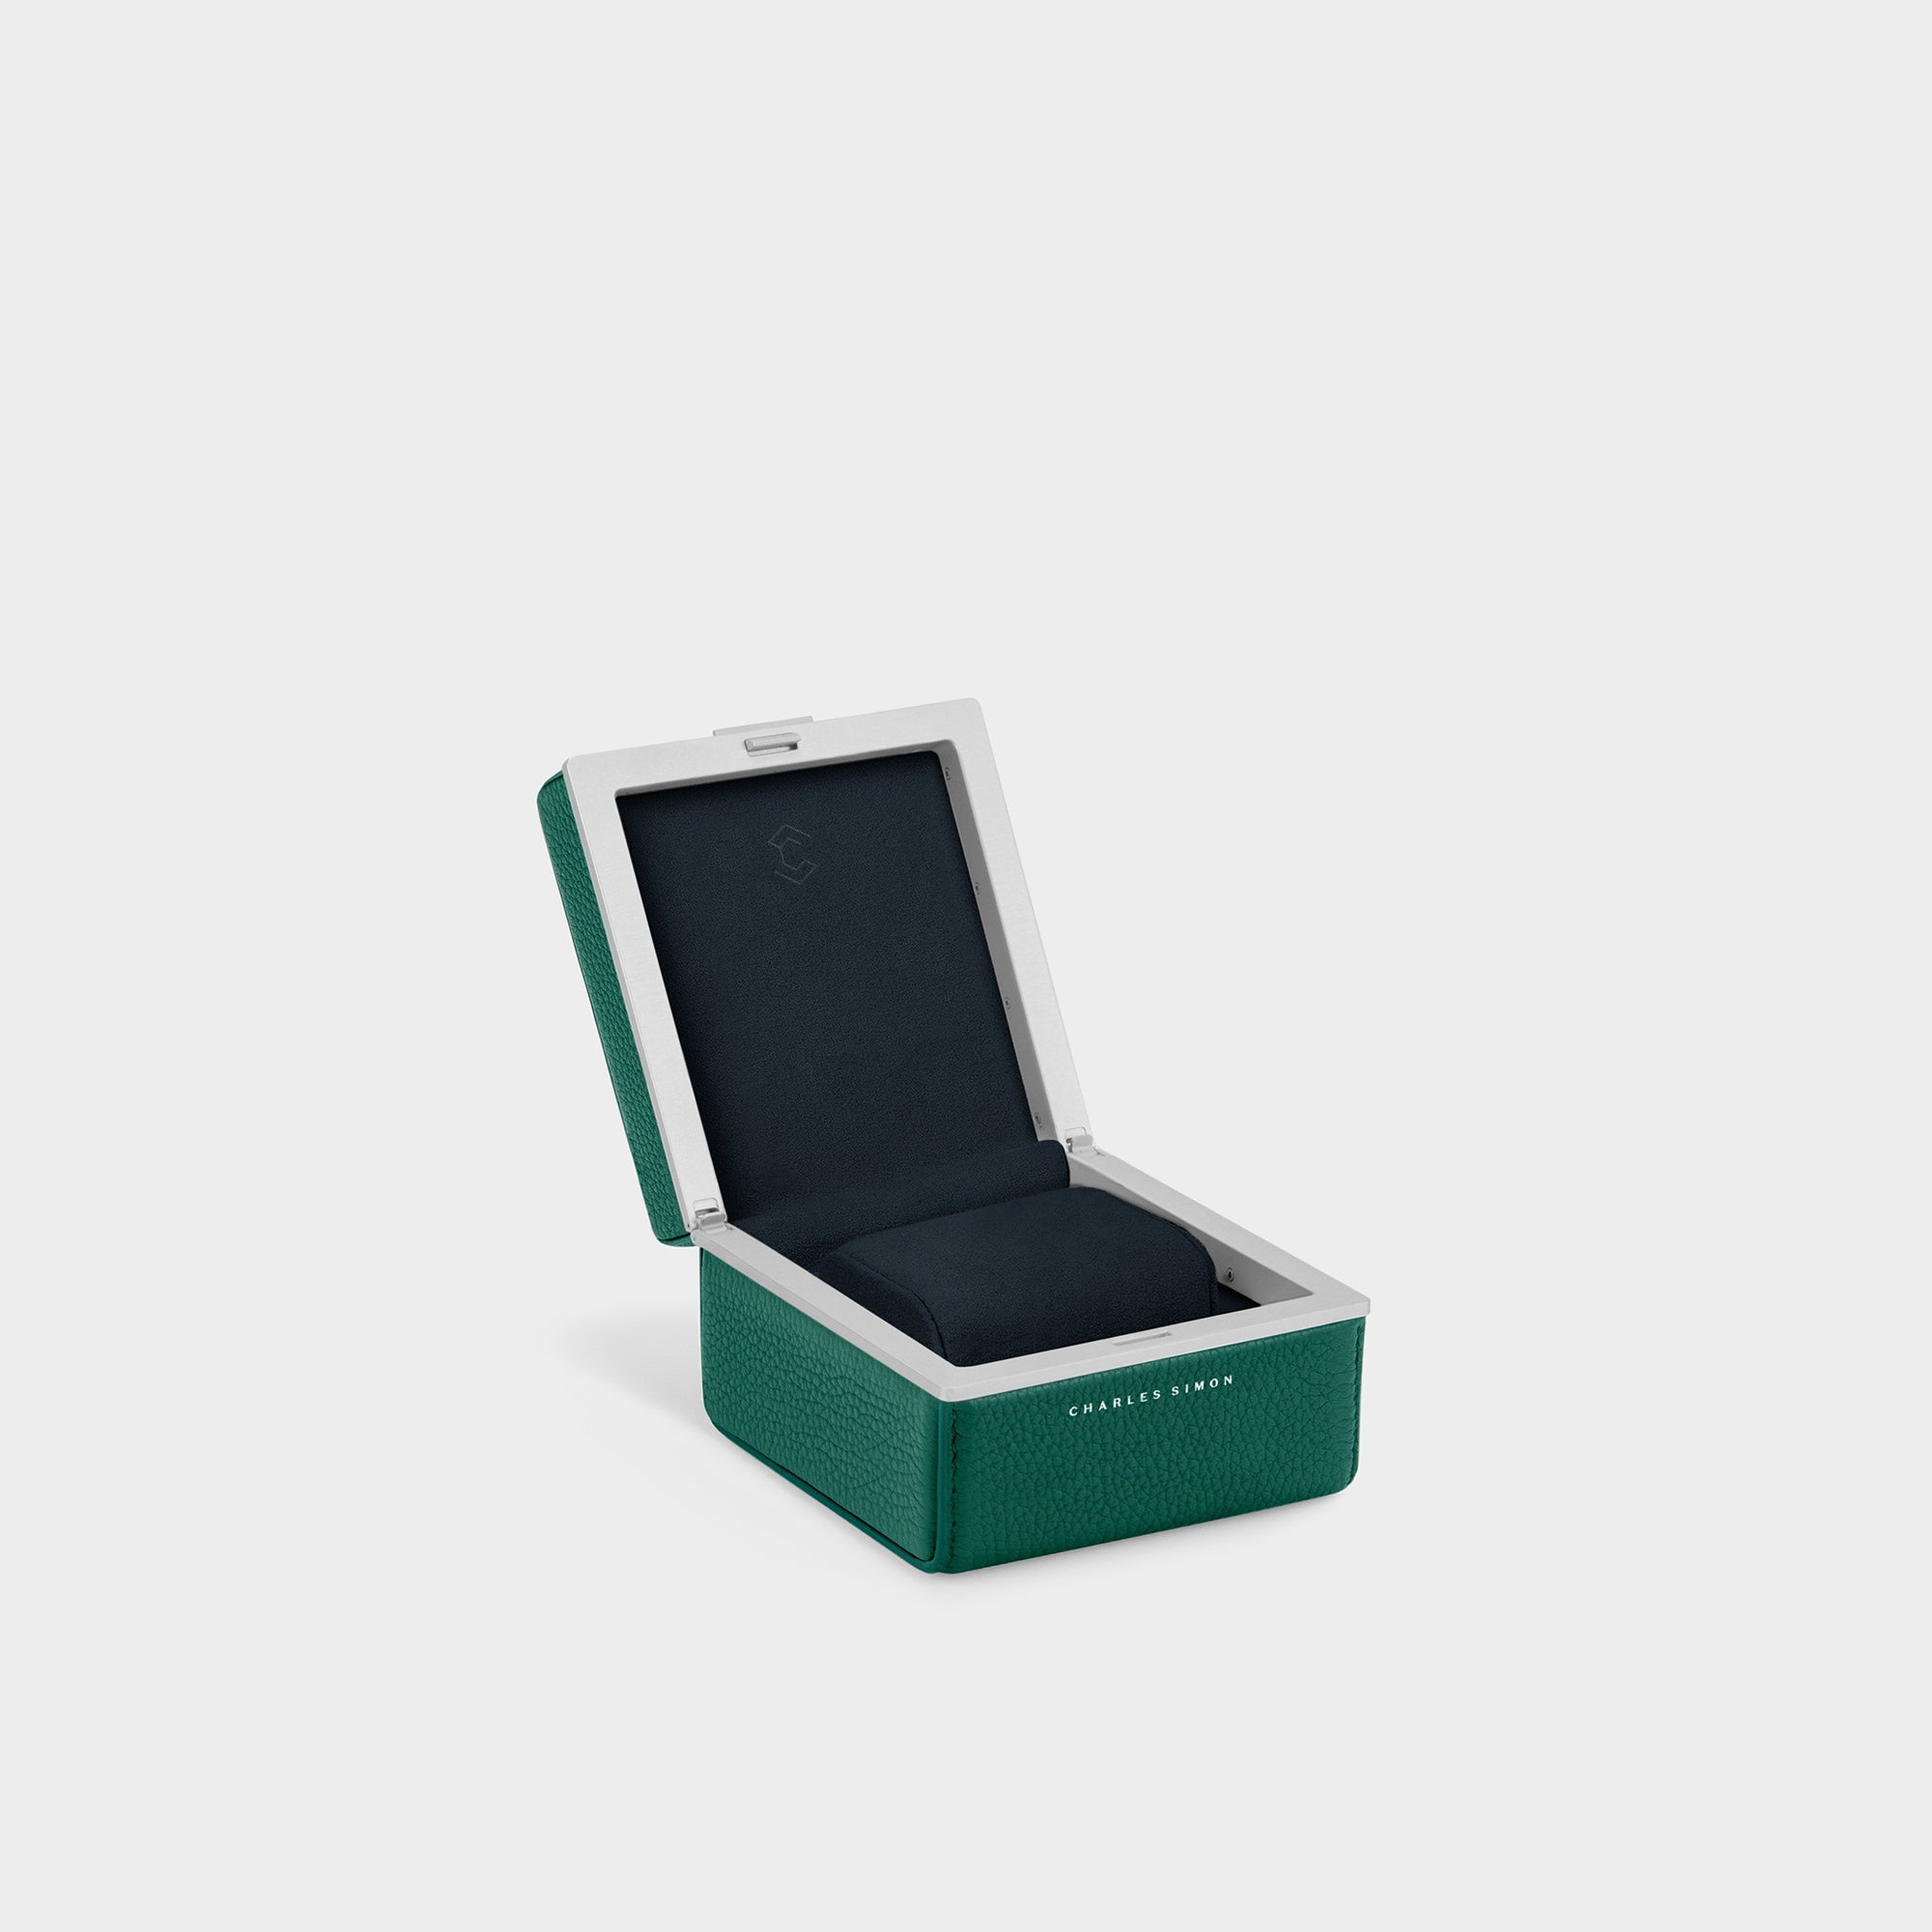 Eaton 1 watch case for 1 watch. Handmade from emerald French leather, anodized aluminum and deep blue Alcantara interior